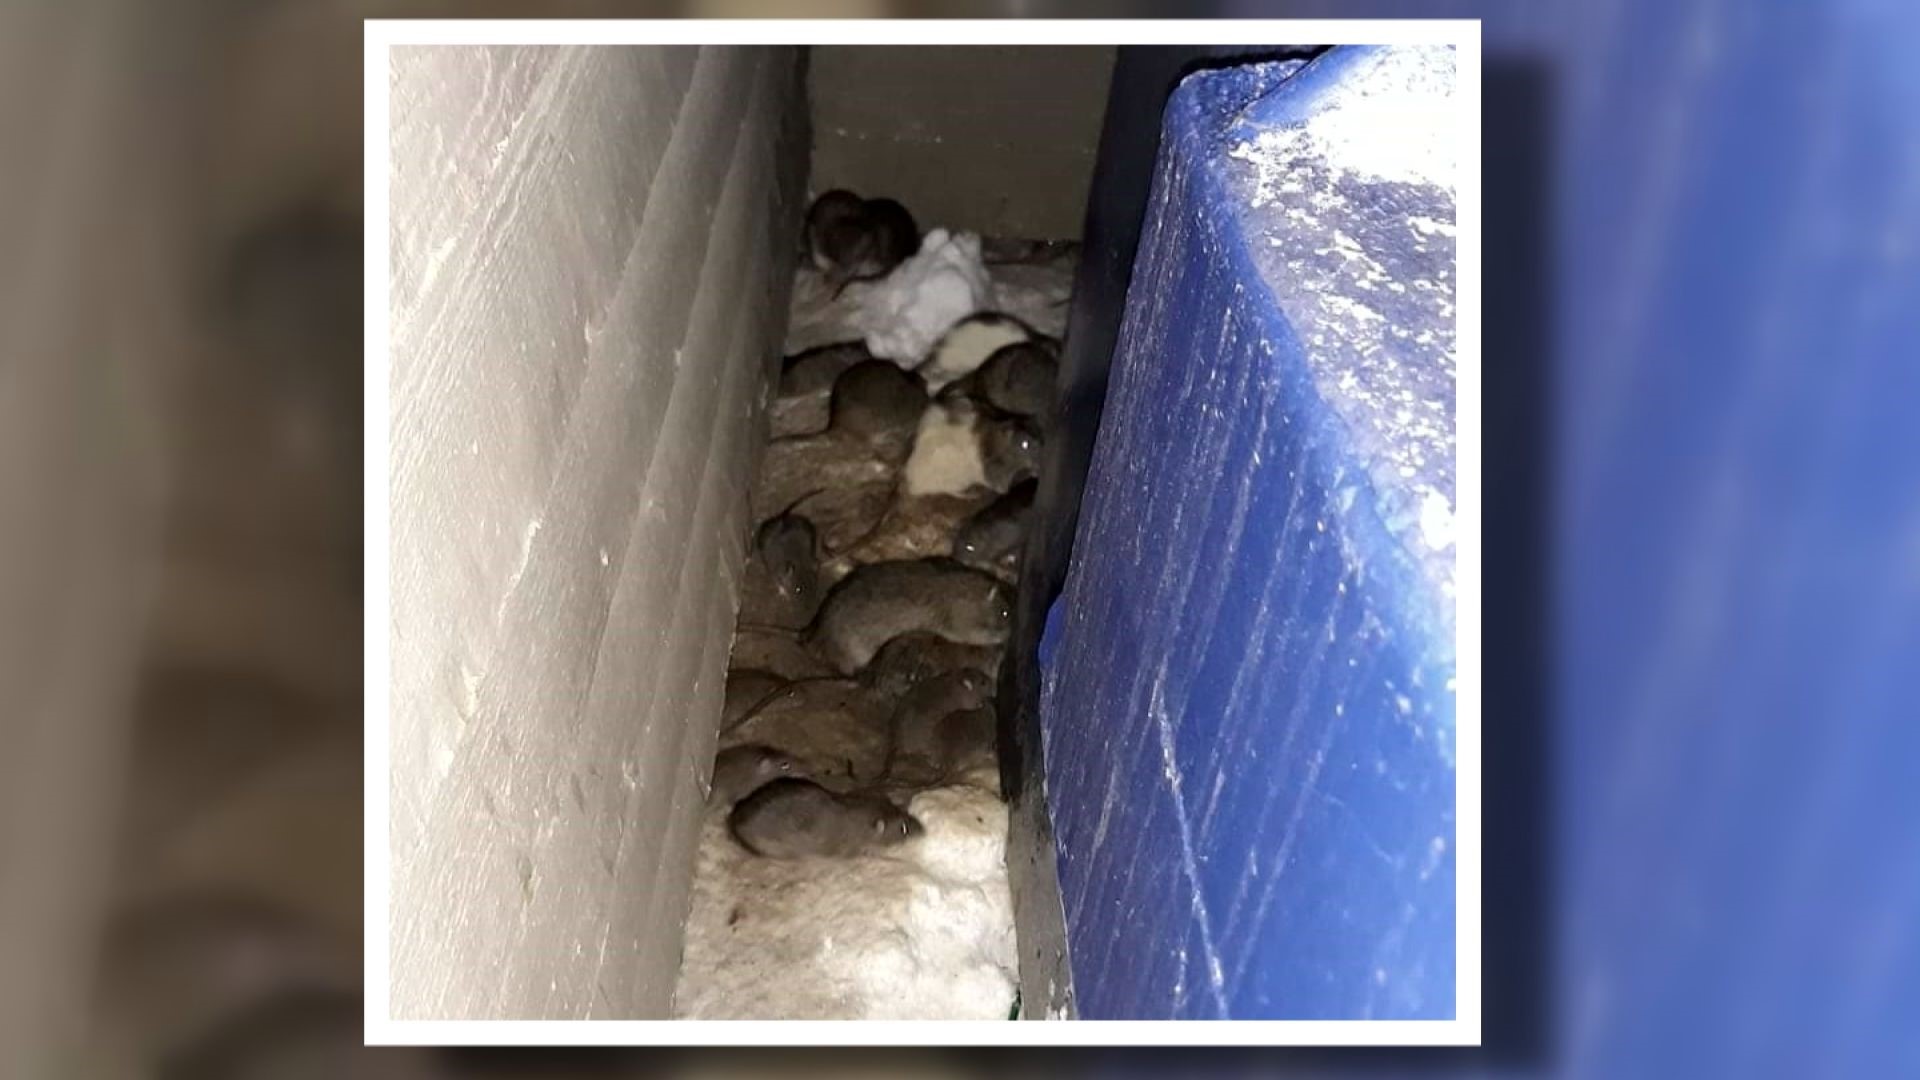 The owners of Pembrooke on the Green in southeast Denver have been fined thousands of dollars following multiple reports of rats on the property.